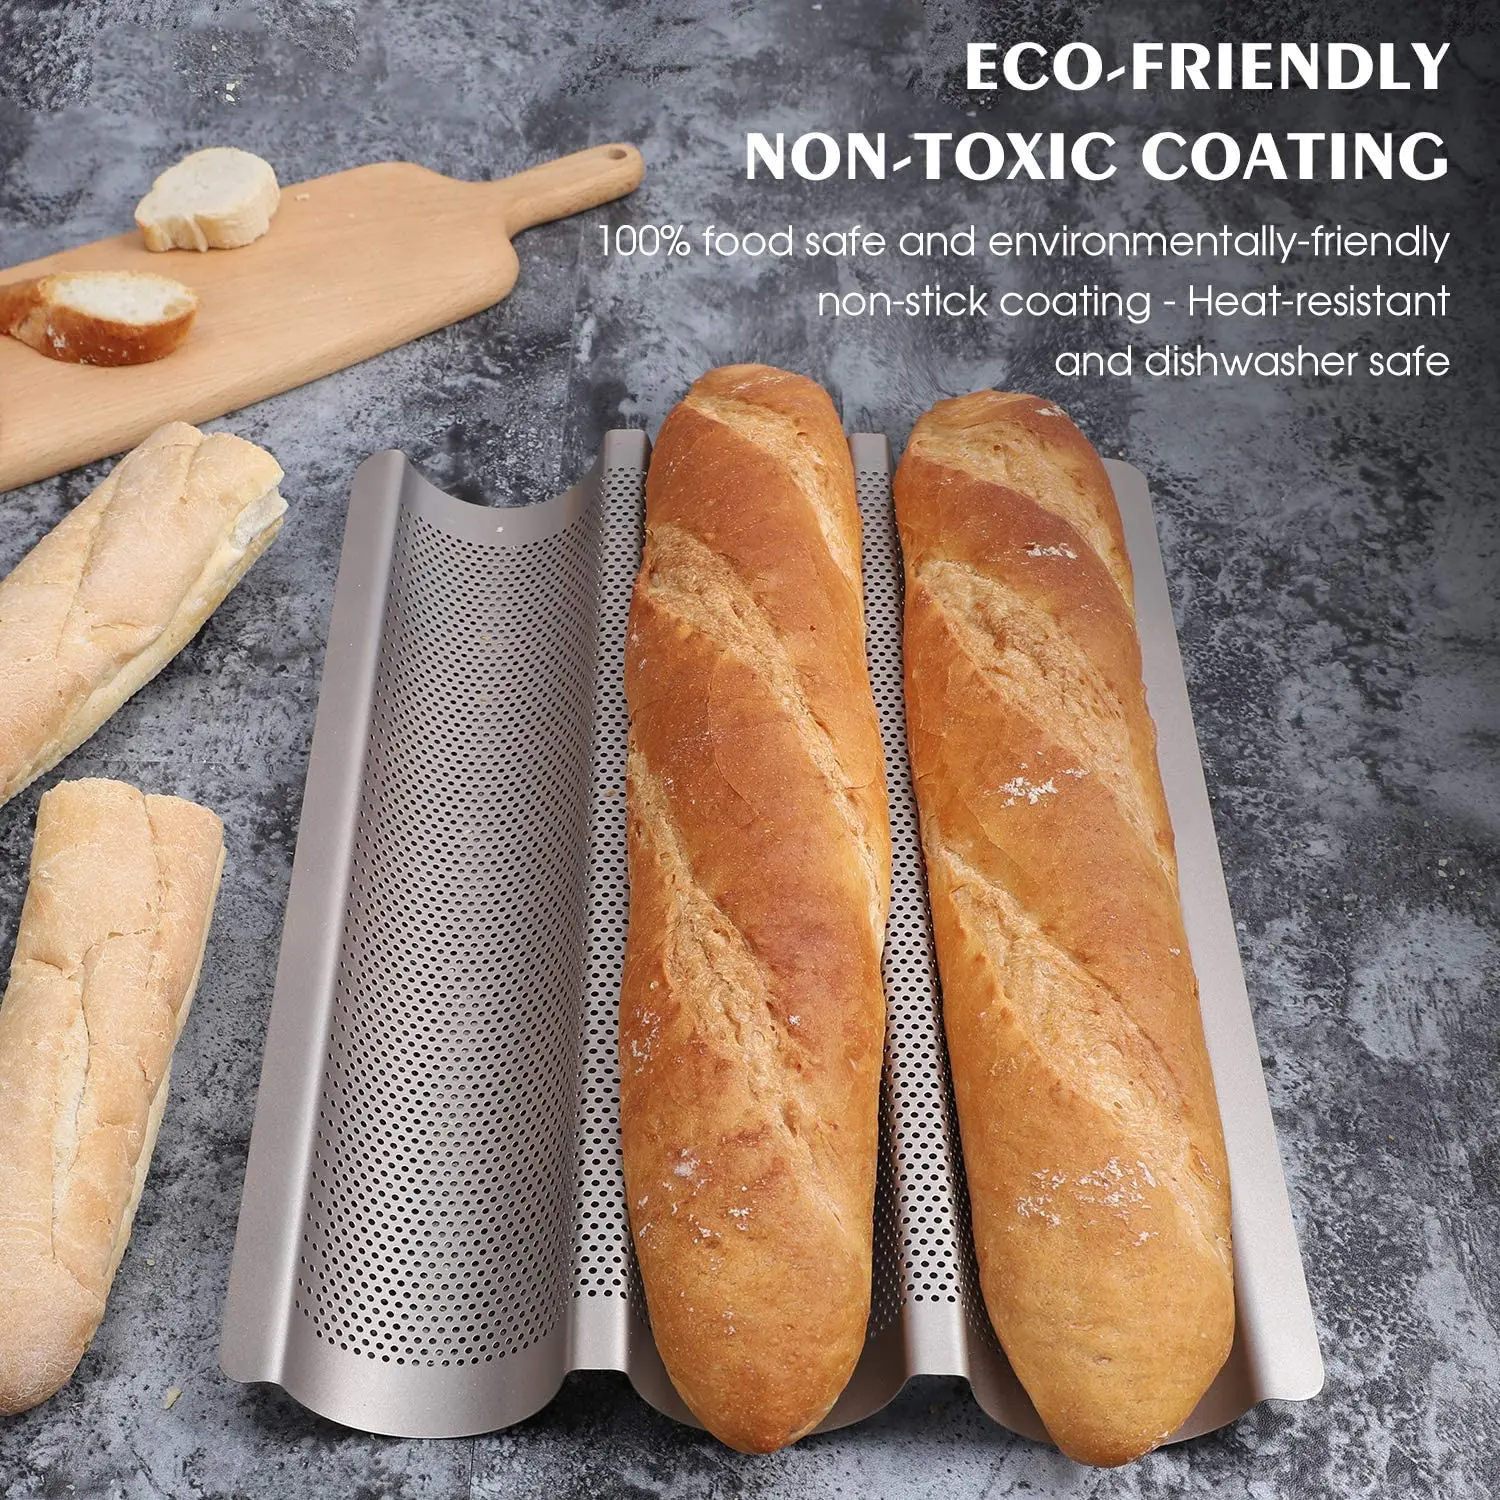 ORNOOU 2 Pack Nonstick Perforated Baguette Pan for French Bread Baking 4 Wave Loaves Loaf Bake Mold Toast Cooking Bakers Molding,14.96 x 6.38 inch 